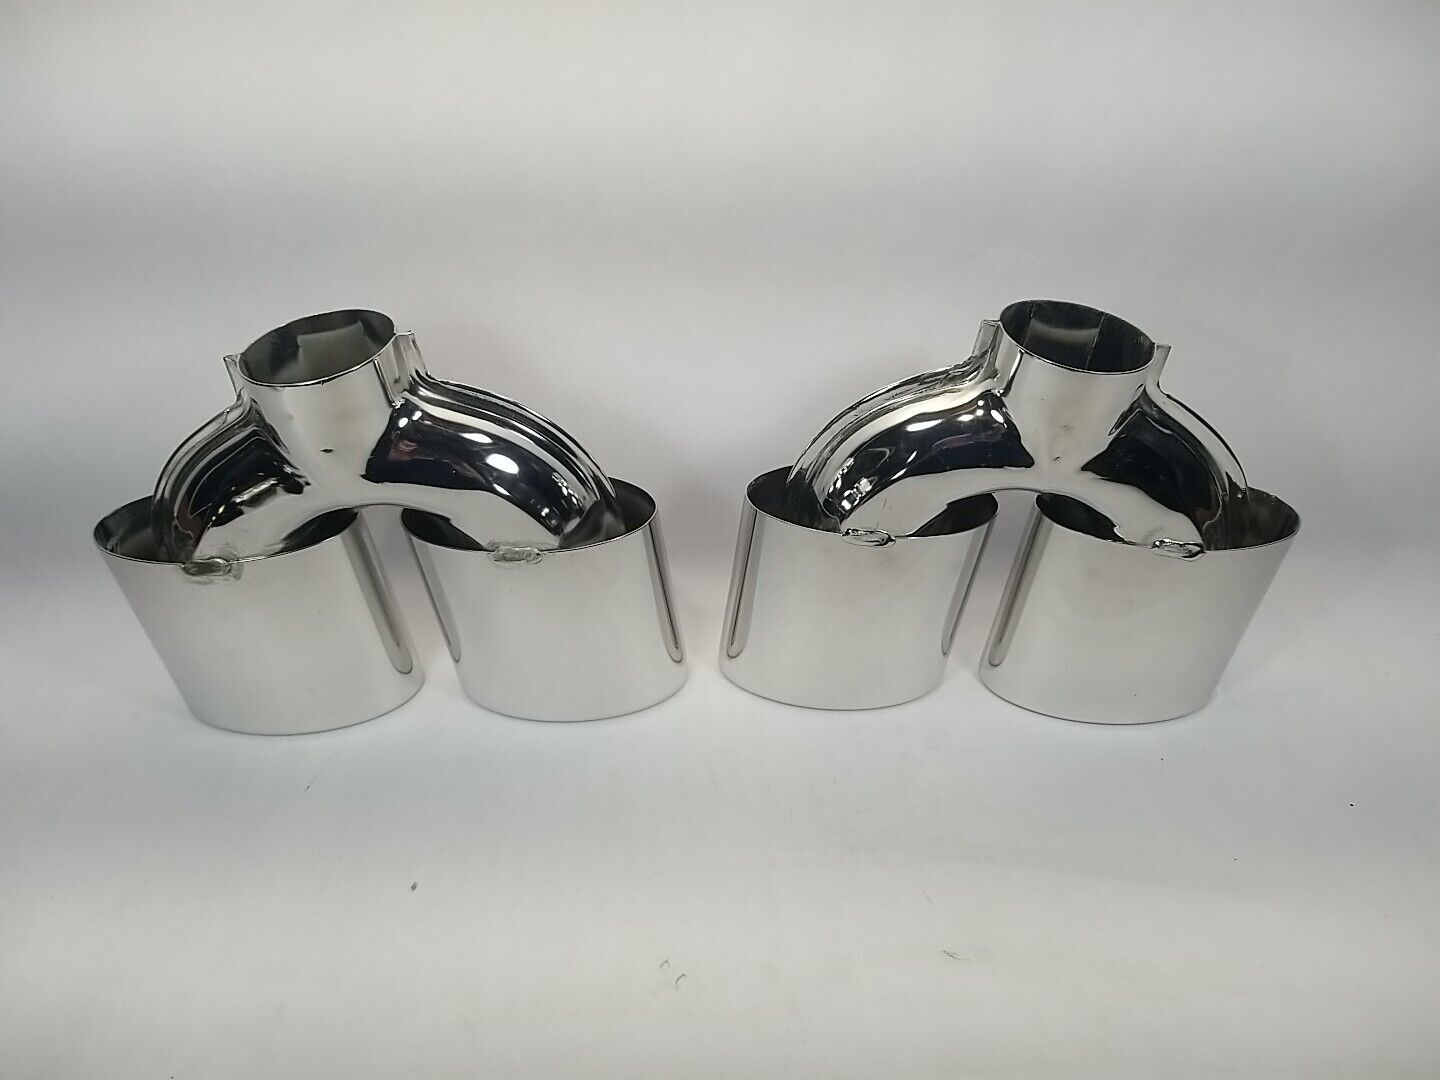 00-11 CADILLAC DEVILLE DHS DTS EXHAUST TIPS SET STAINLESS STEEL OEM NOS HOT RAT